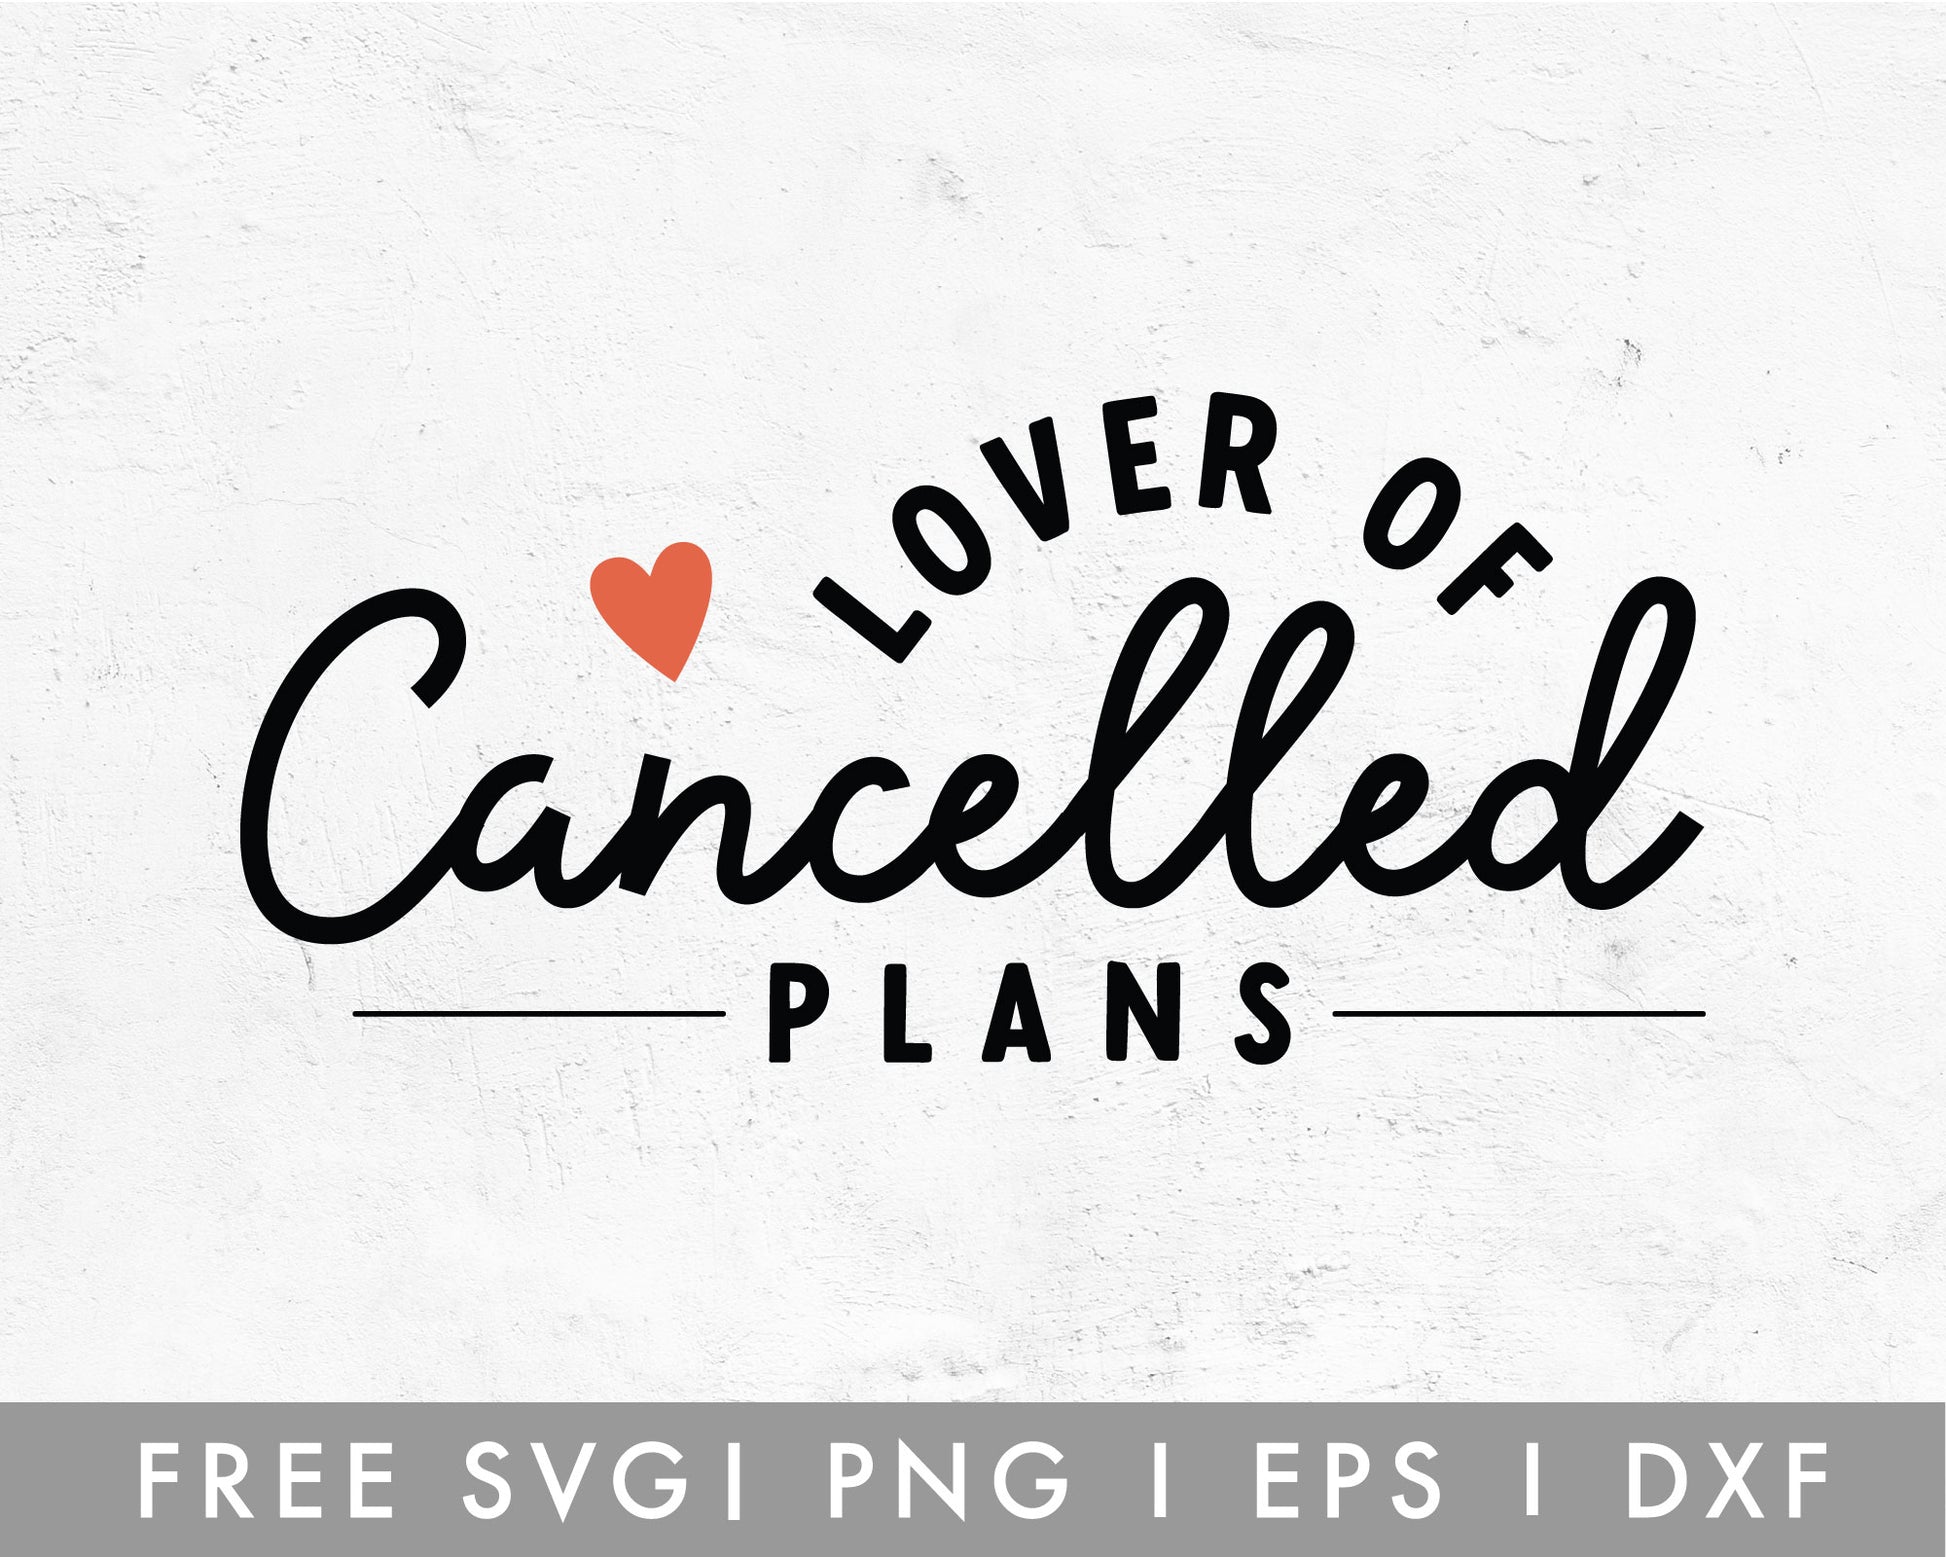 FREE SVG: Introvert SVG | Lover Of Cancelled Plans SVG Cuttable File, fully compatible with Cricut, Cameo Silhouette | Cricut Craft, Cricut for beginner, Cricut Design Space, Cricut Project, Cameo Silhouette Craft, Vinyl Craft | Extension: SVG, PNG, EPS, DXF